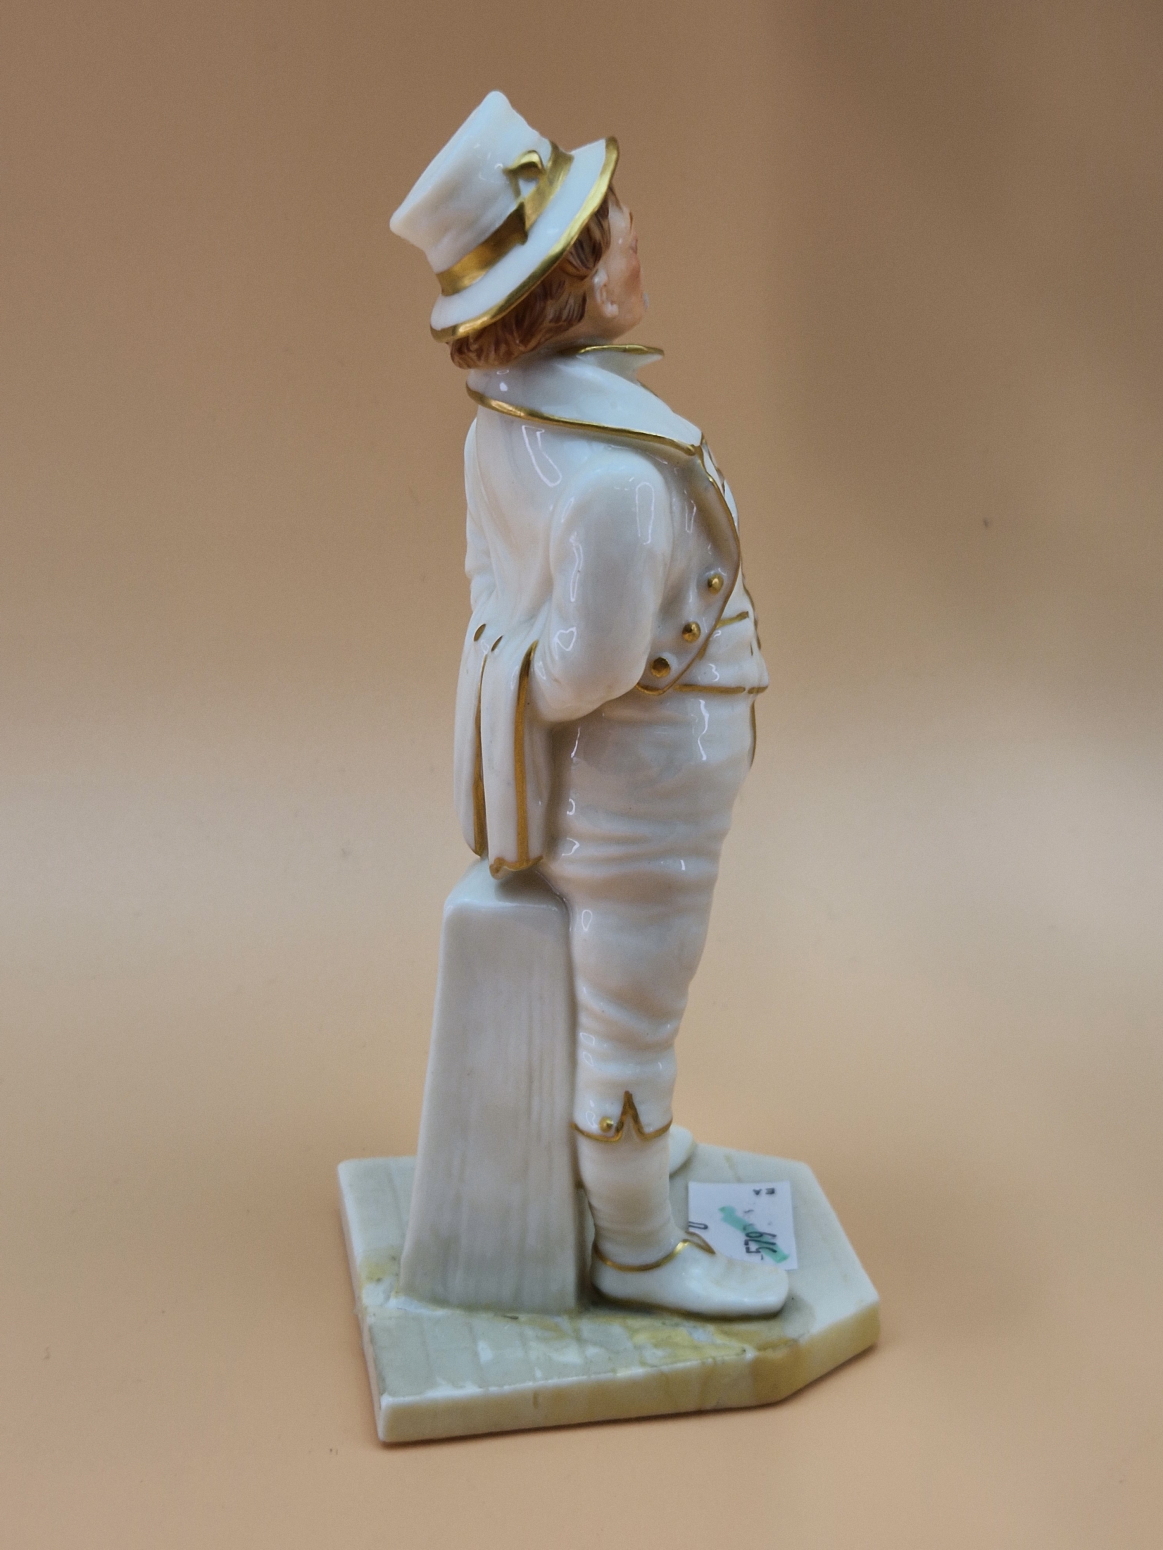 A VICTORIAN ROYAL WORCESTER FIGURE OF A BOY SEATED ON A BRANCH OVERLOOKING A GILT EDGED BASKET. W - Image 7 of 9